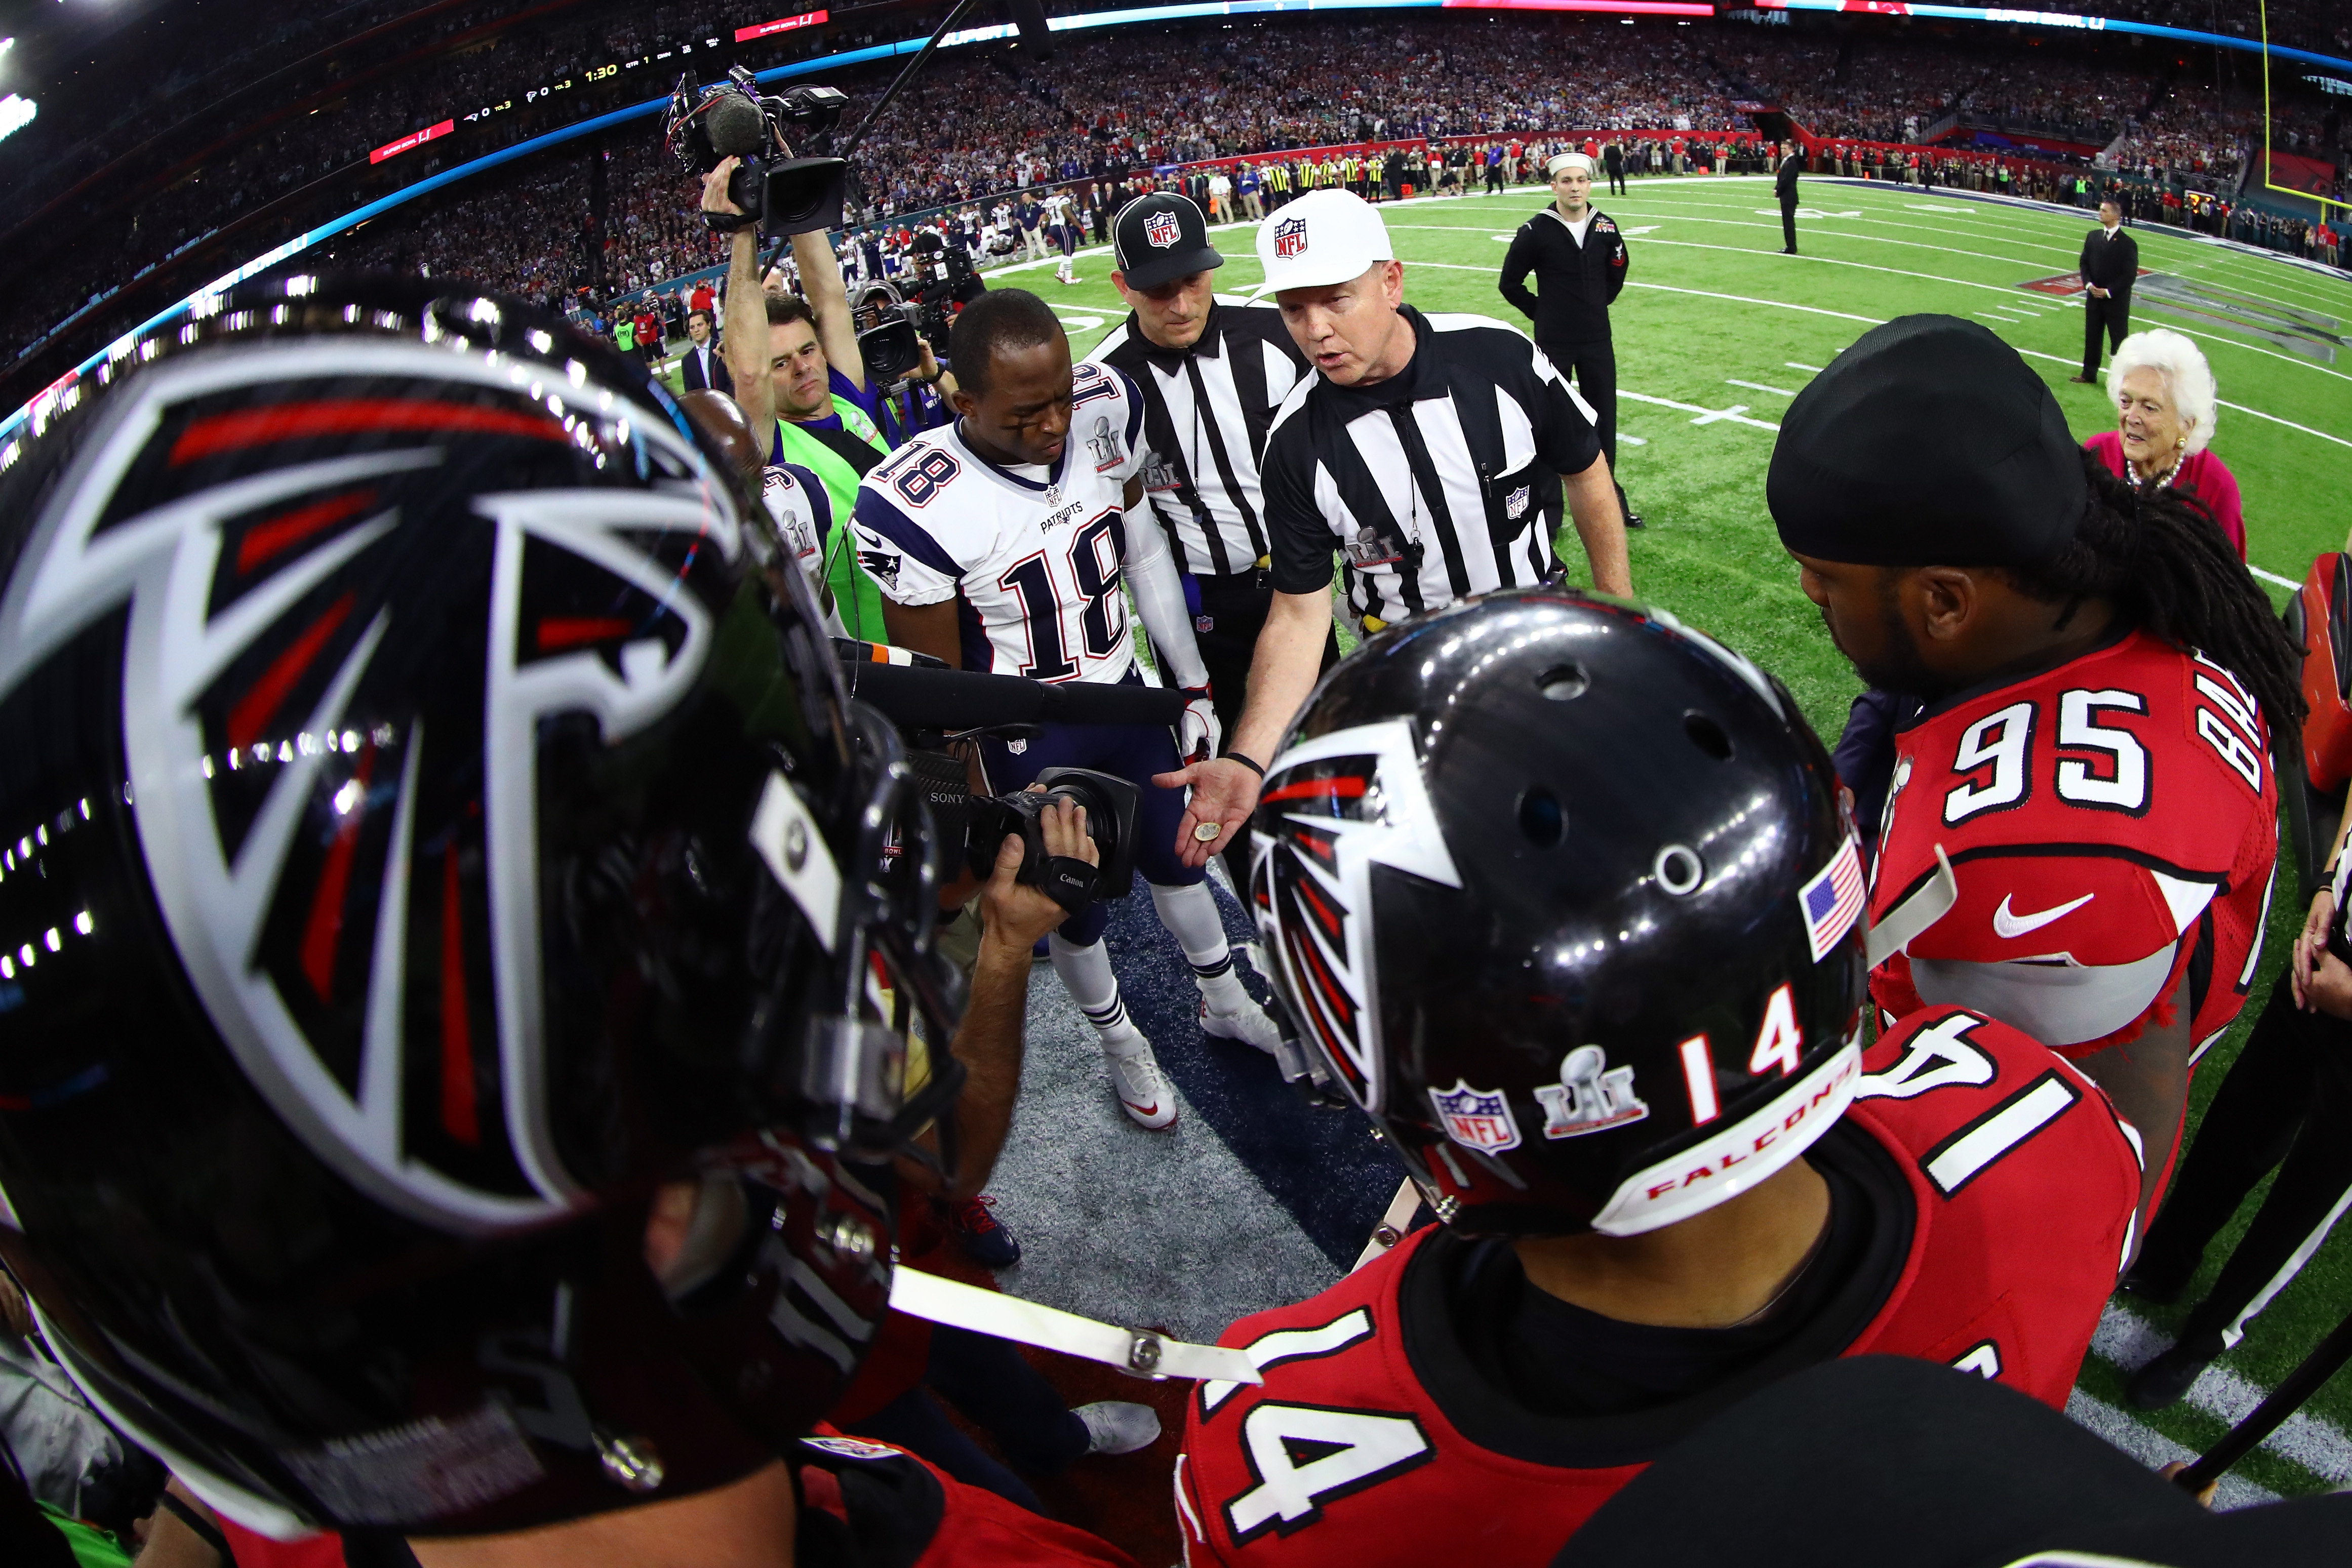 Heads or tails? How to bet the Super Bowl 2023 coin toss prop